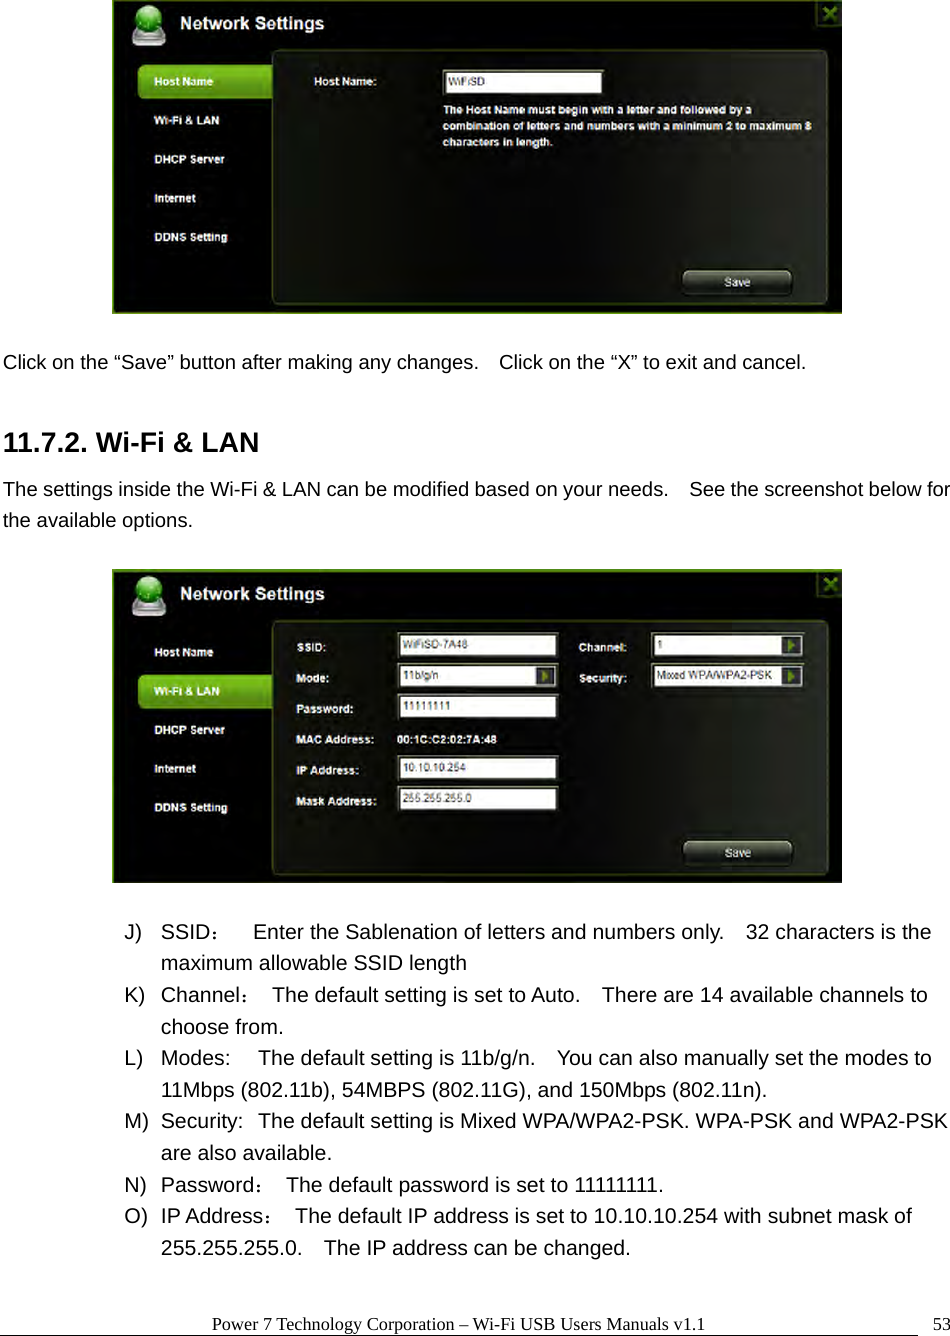 Power 7 Technology Corporation – Wi-Fi USB Users Manuals v1.1  53  Click on the “Save” button after making any changes.    Click on the “X” to exit and cancel.  11.7.2. Wi-Fi &amp; LAN The settings inside the Wi-Fi &amp; LAN can be modified based on your needs.    See the screenshot below for the available options.    J) SSID：    Enter the Sablenation of letters and numbers only.    32 characters is the maximum allowable SSID length   K) Channel：  The default setting is set to Auto.    There are 14 available channels to choose from. L)  Modes:  The default setting is 11b/g/n.    You can also manually set the modes to 11Mbps (802.11b), 54MBPS (802.11G), and 150Mbps (802.11n). M)  Security:  The default setting is Mixed WPA/WPA2-PSK. WPA-PSK and WPA2-PSK are also available. N) Password：  The default password is set to 11111111. O) IP Address：  The default IP address is set to 10.10.10.254 with subnet mask of 255.255.255.0.    The IP address can be changed.  